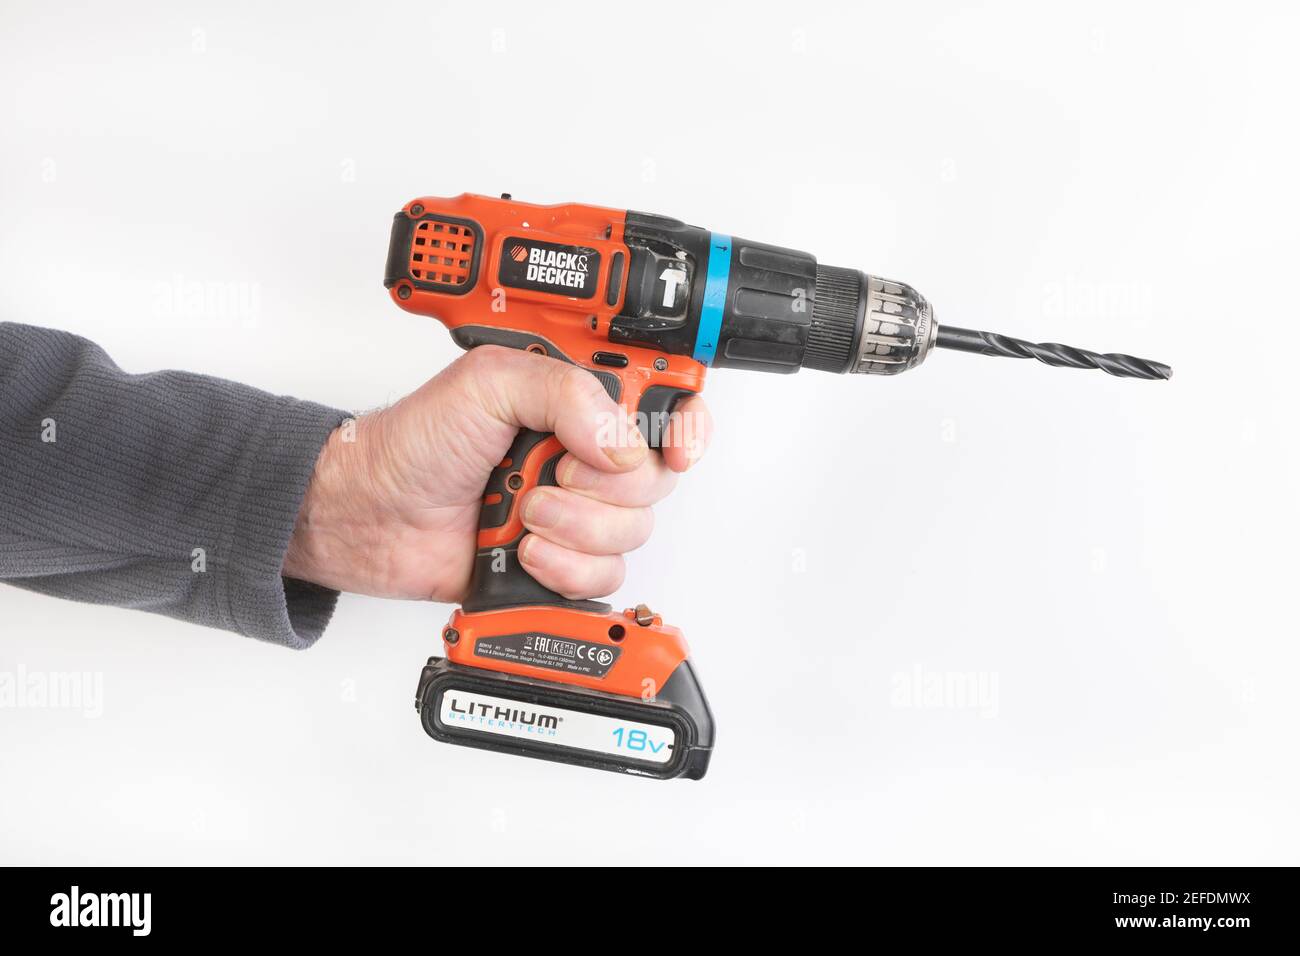 A man holding a Black and Decker cordless 18v drill Stock Photo - Alamy